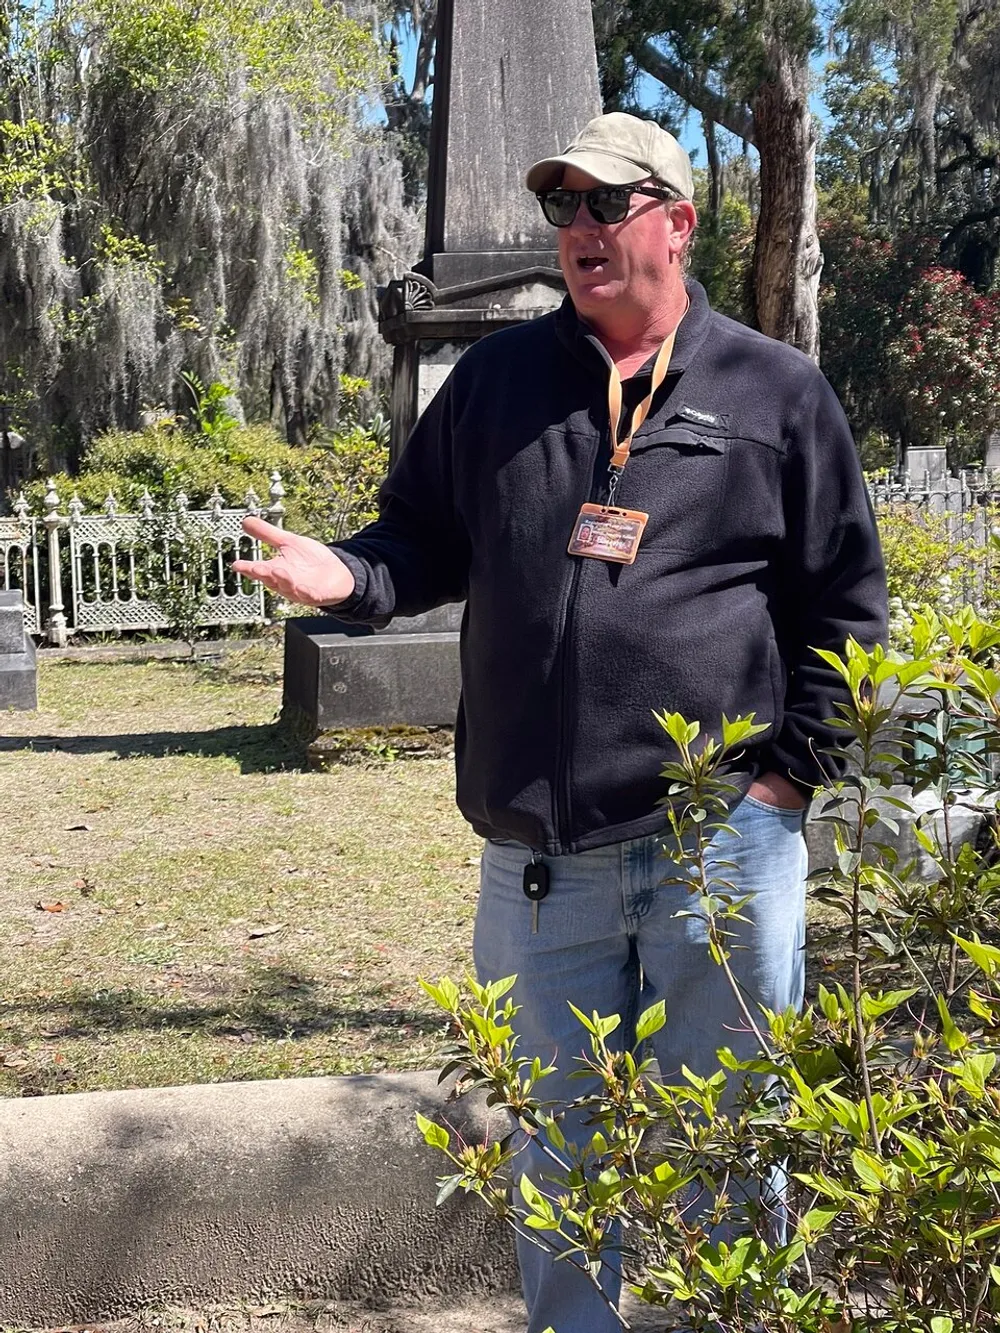 A person is giving a tour or presentation outdoors possibly in a historical or cemetery setting while gesturing with their hand